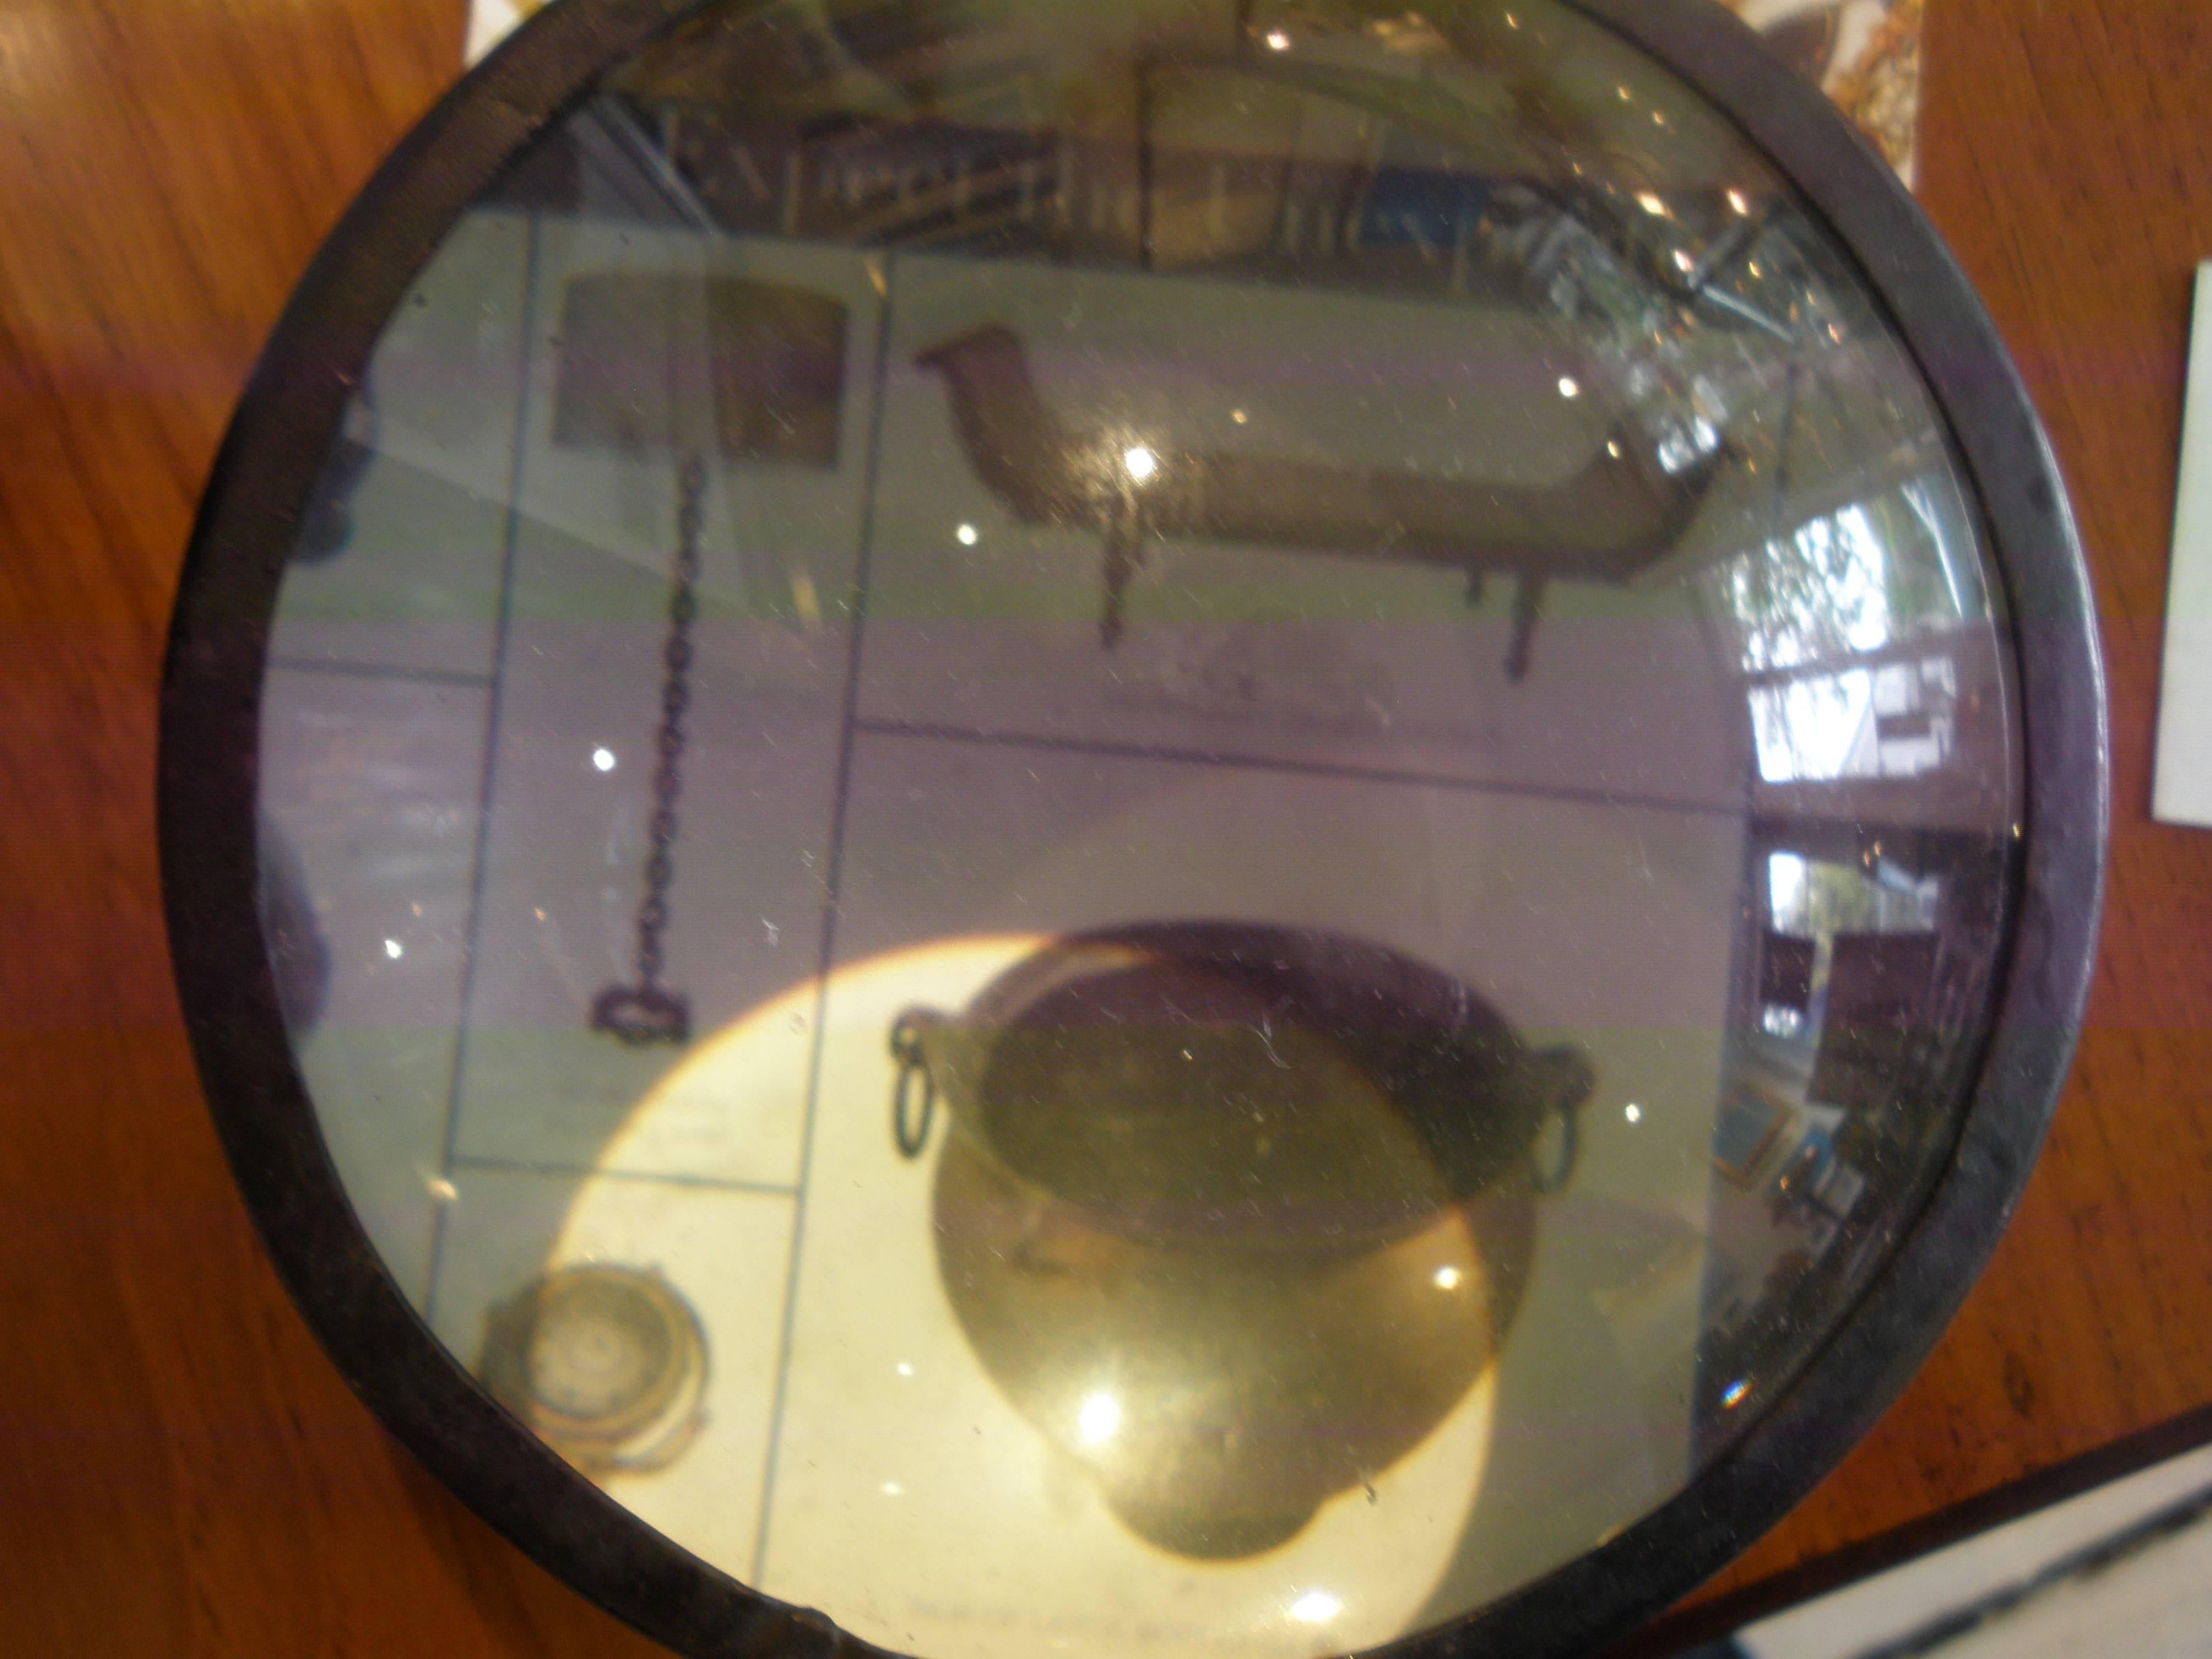 A ship's magnifying glass used to read navigational charts aboard ship. Made of iron with the ability to take the top cover off for cleaning purposes. Rare find.

Nautical Antiques located on Nantucket Island.